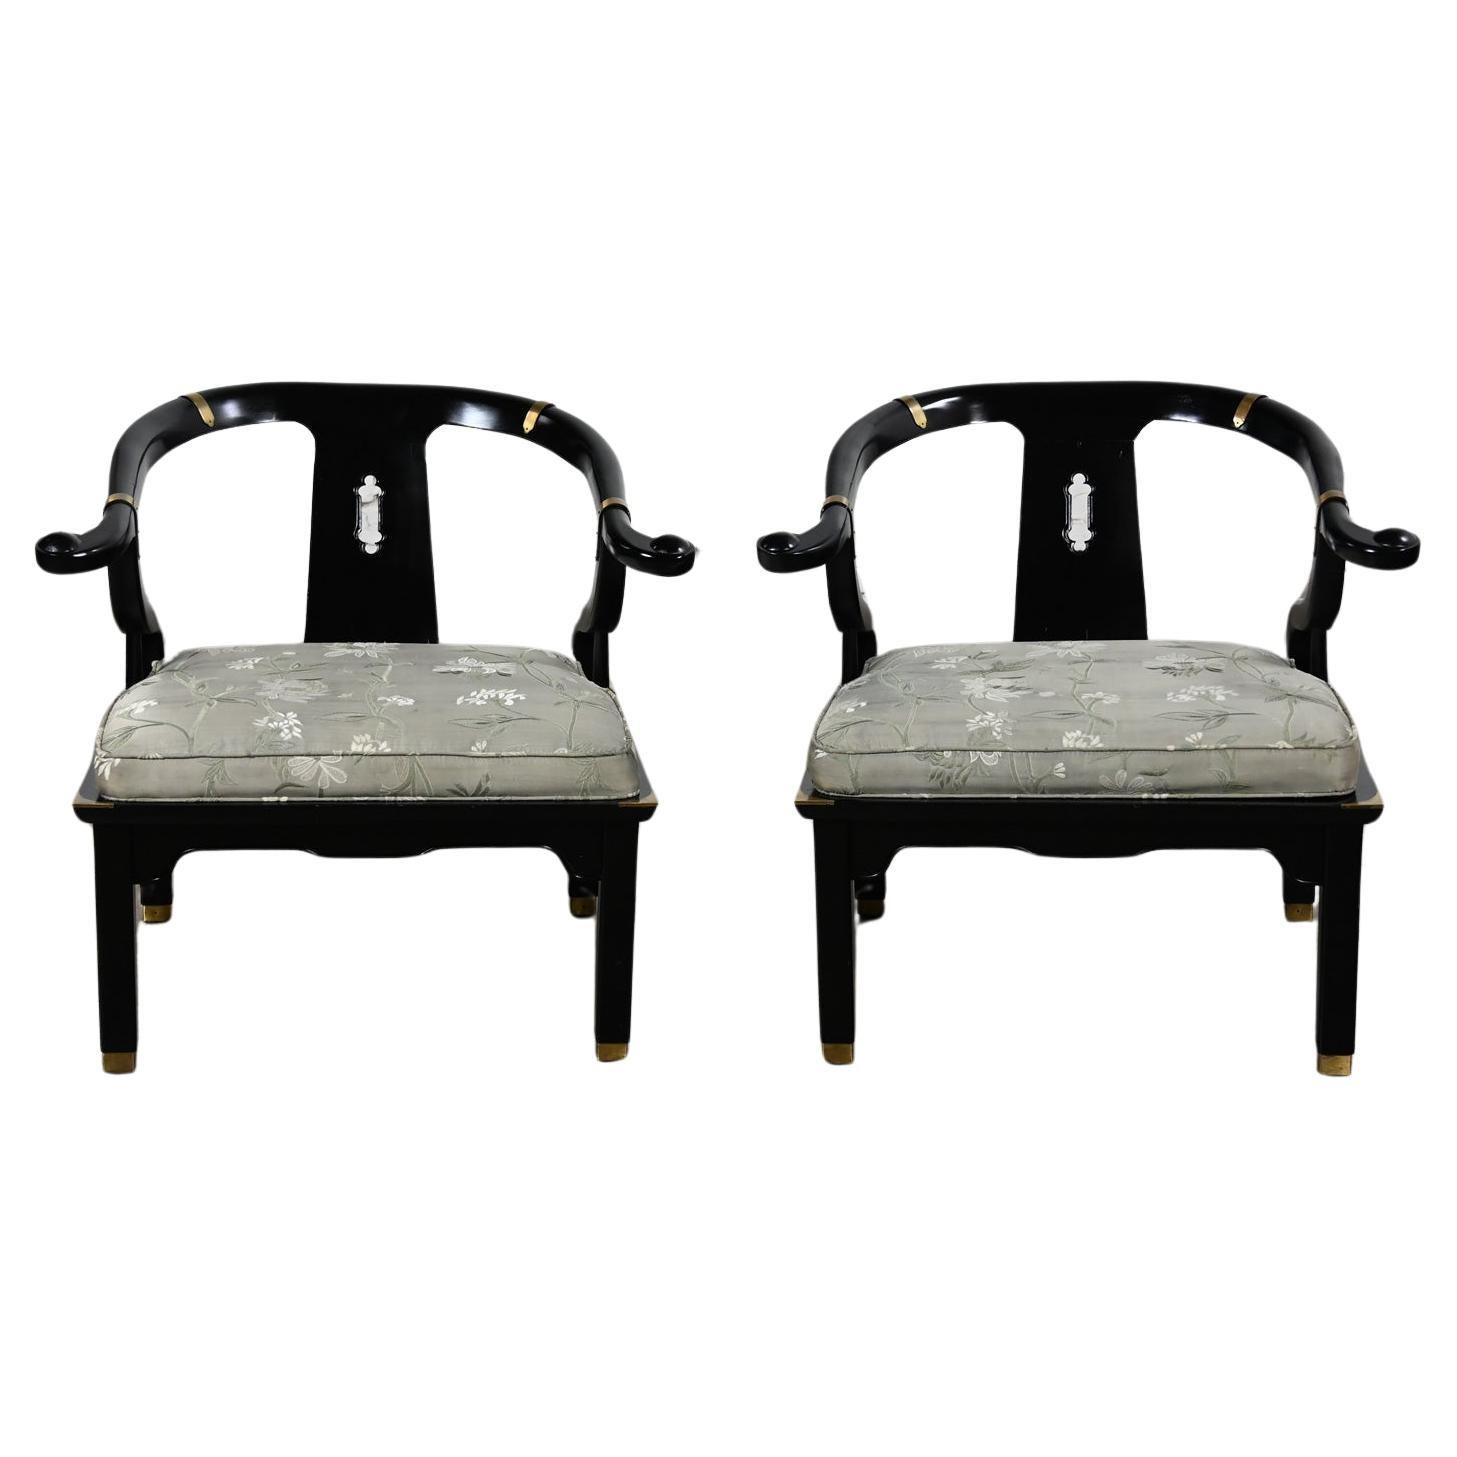 Vintage Chinoiserie Ming Style Yoke Back Chairs Black Lacquered Style James Mont For Sale